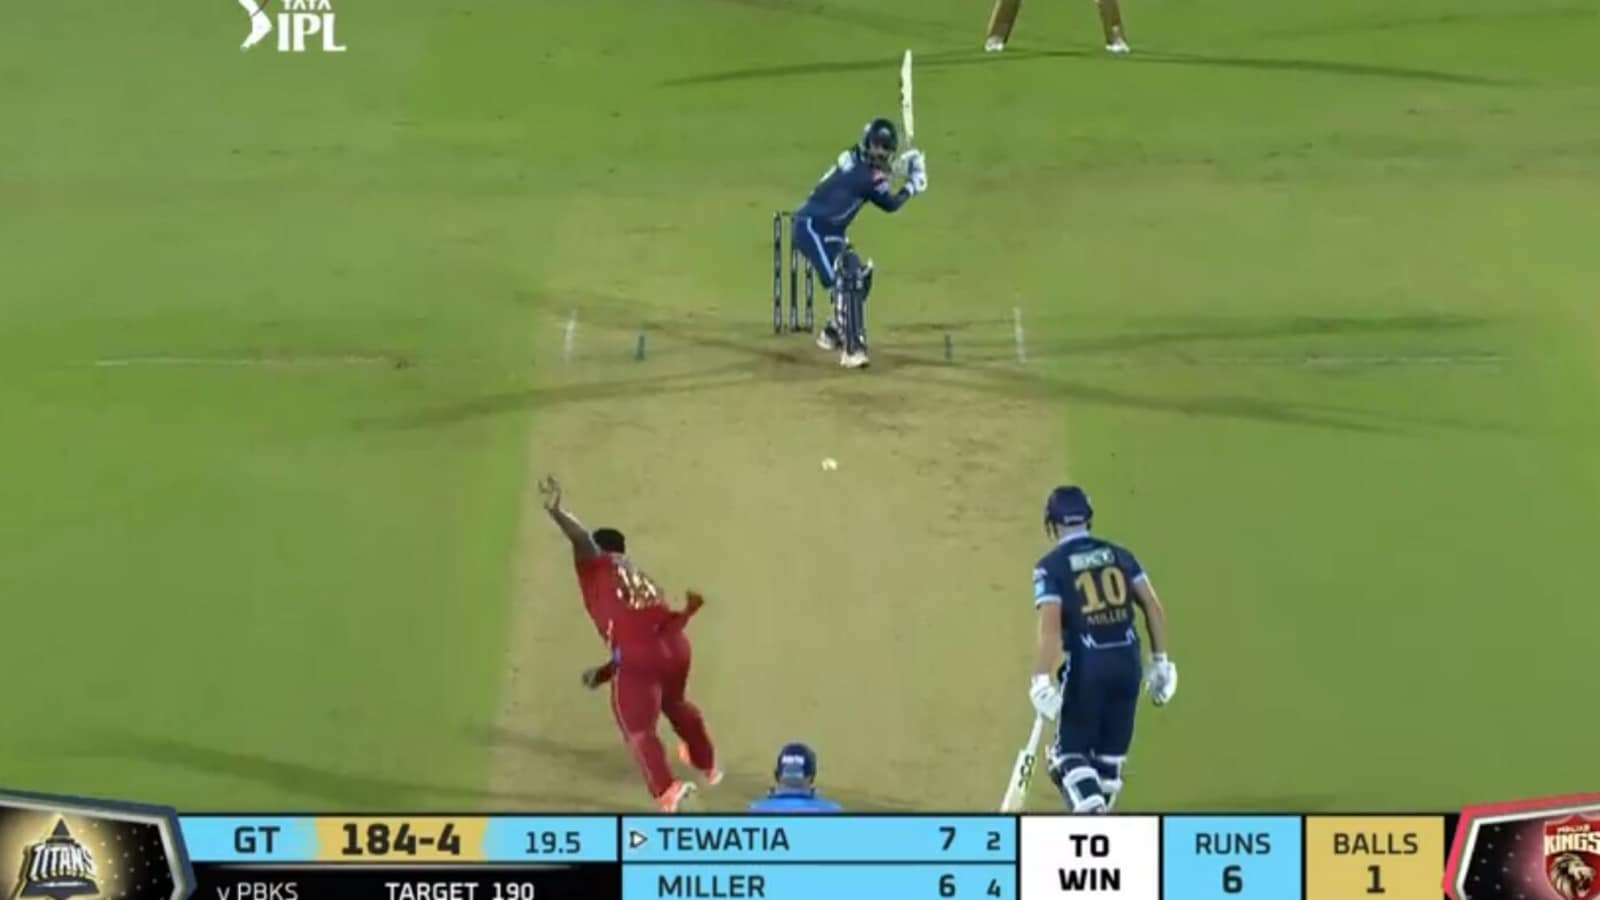 Watch 12 needed off 2 balls, Tewatia repeats Dhonis rare feat with 2 sixes Cricket